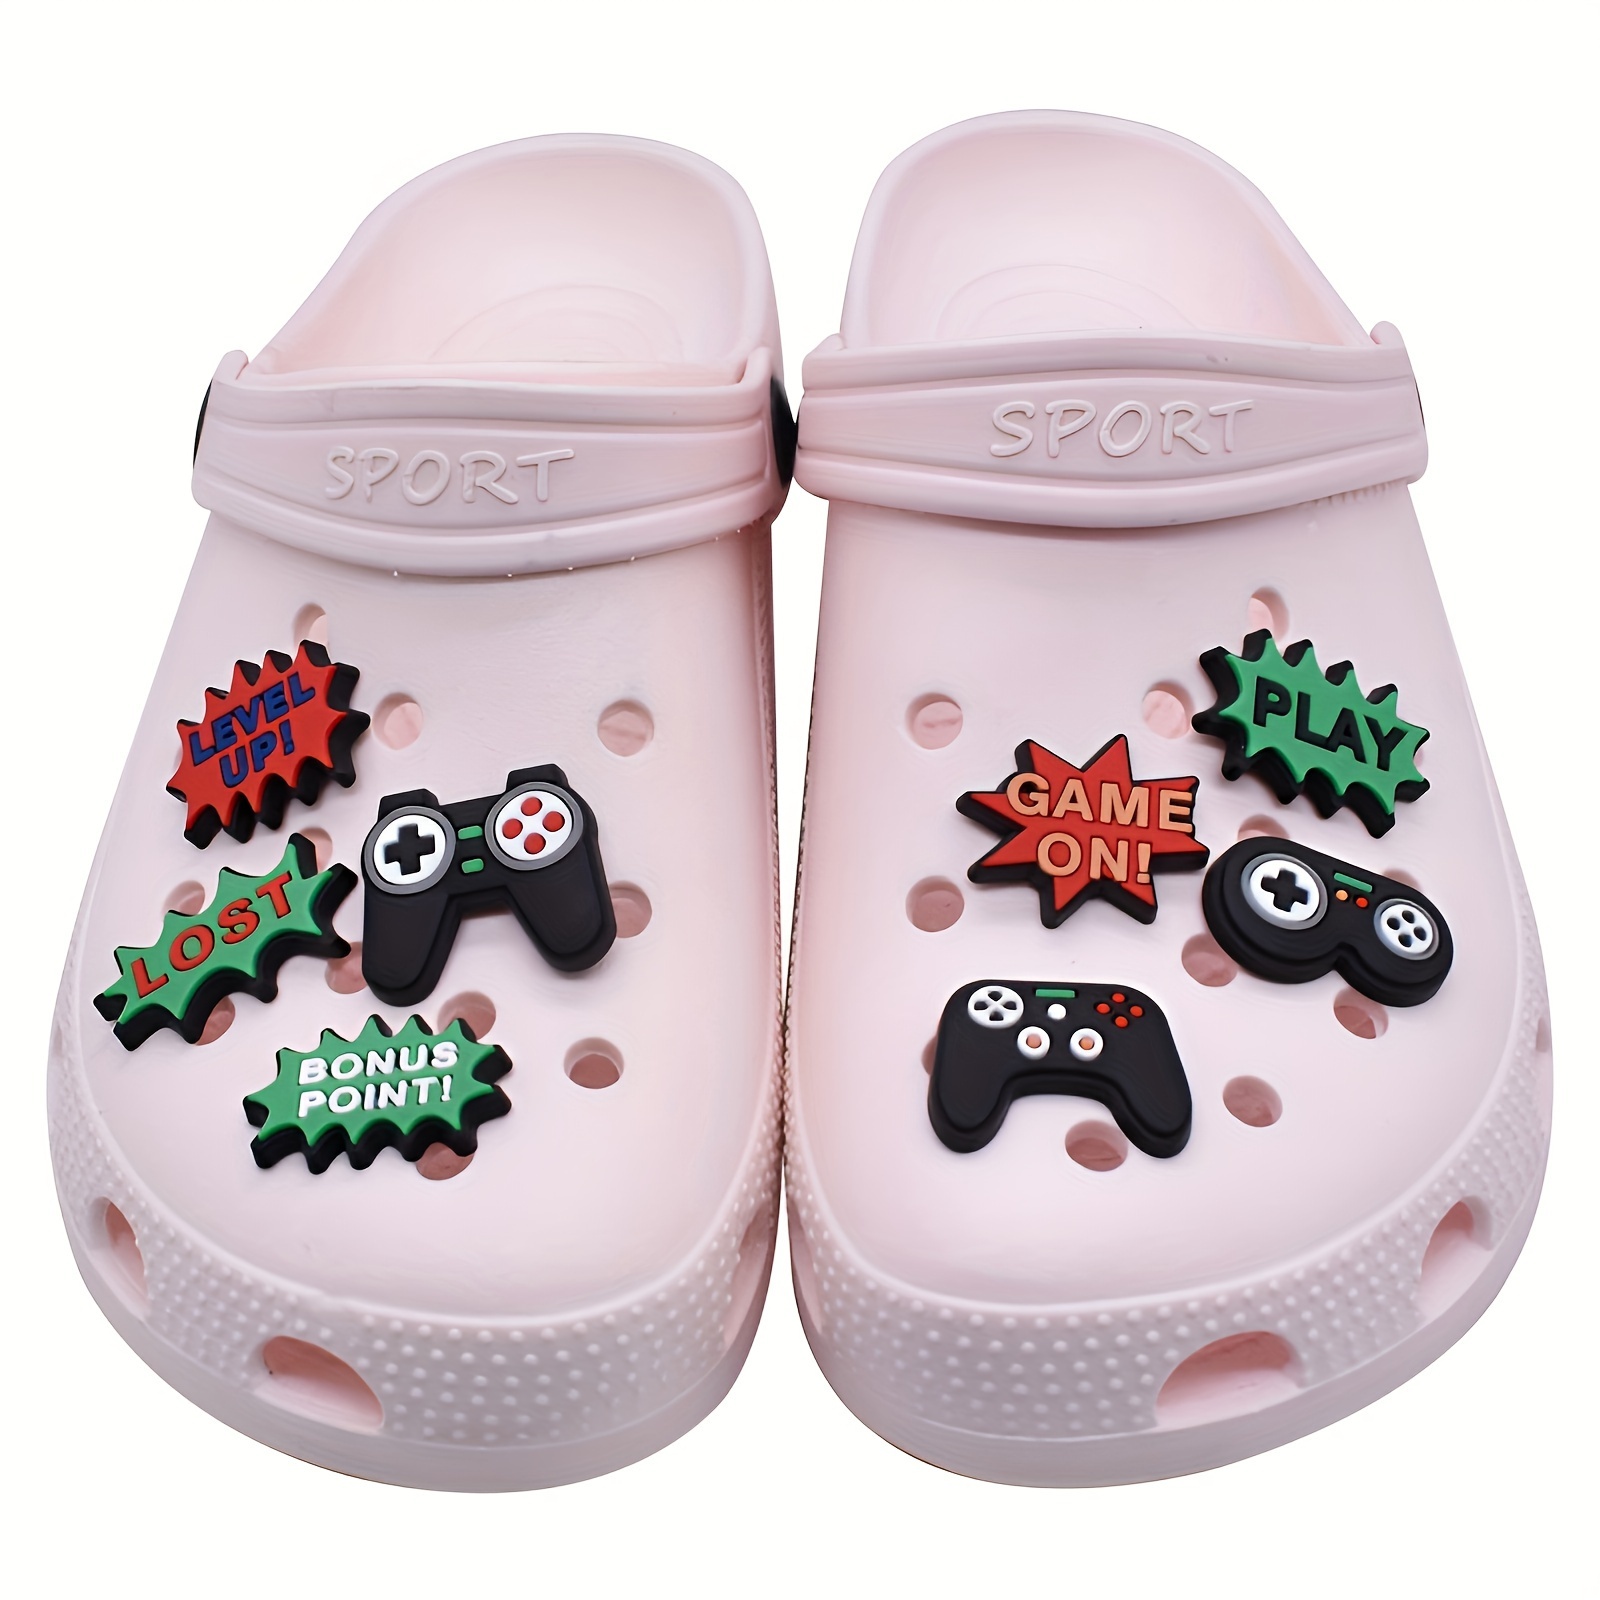 Game Console Controllers - Jibbitz Charms for Crocs shoes